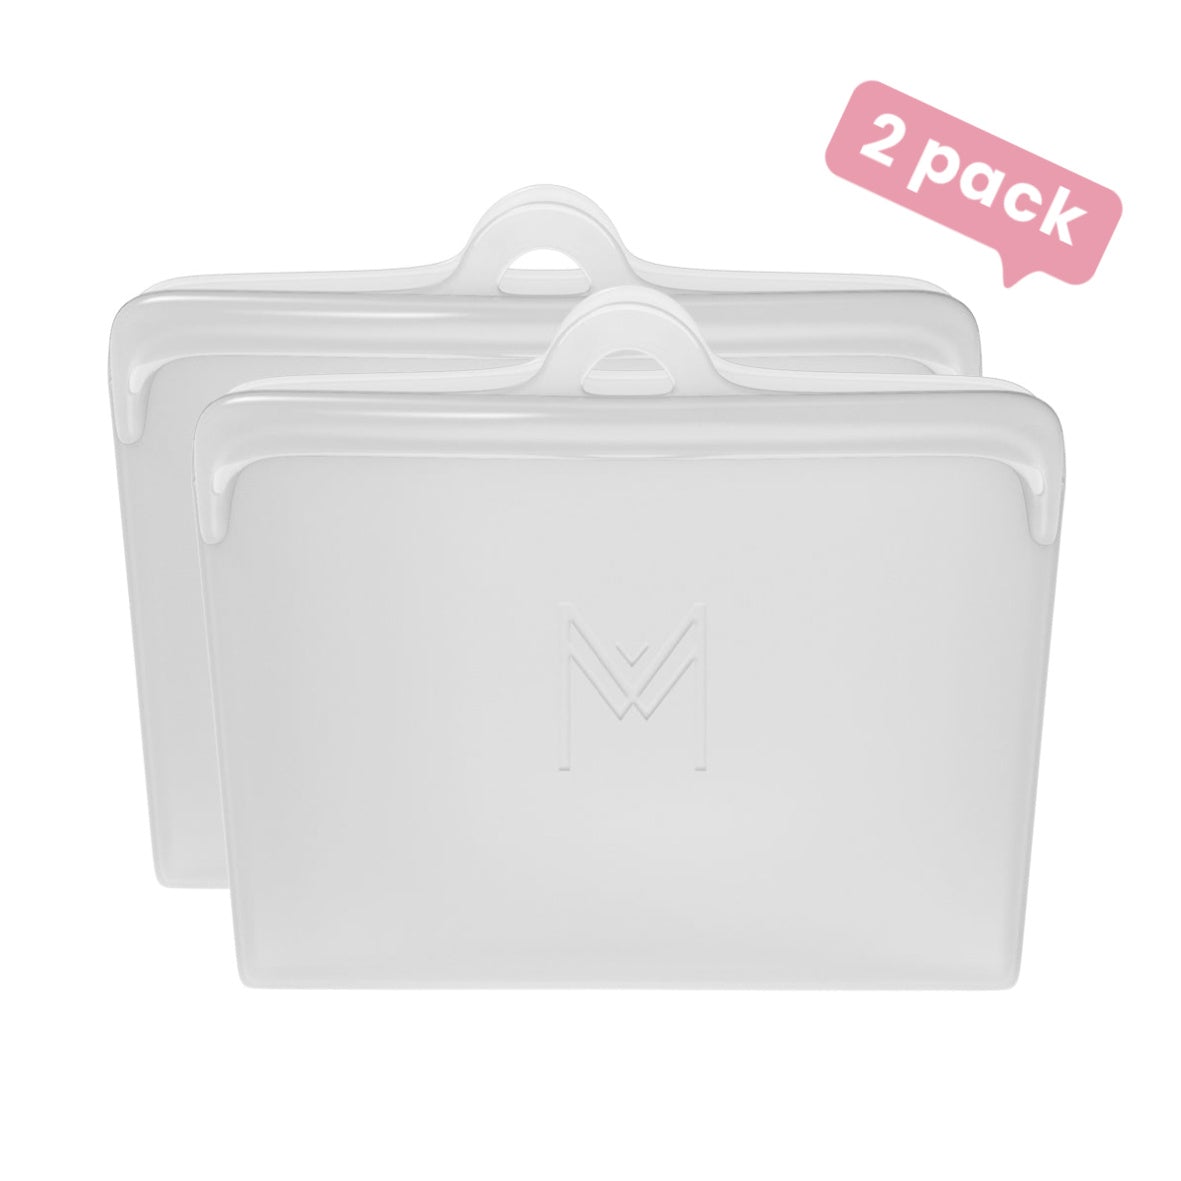 MontiiCo Pack & Snack Silicone Bag - Clear